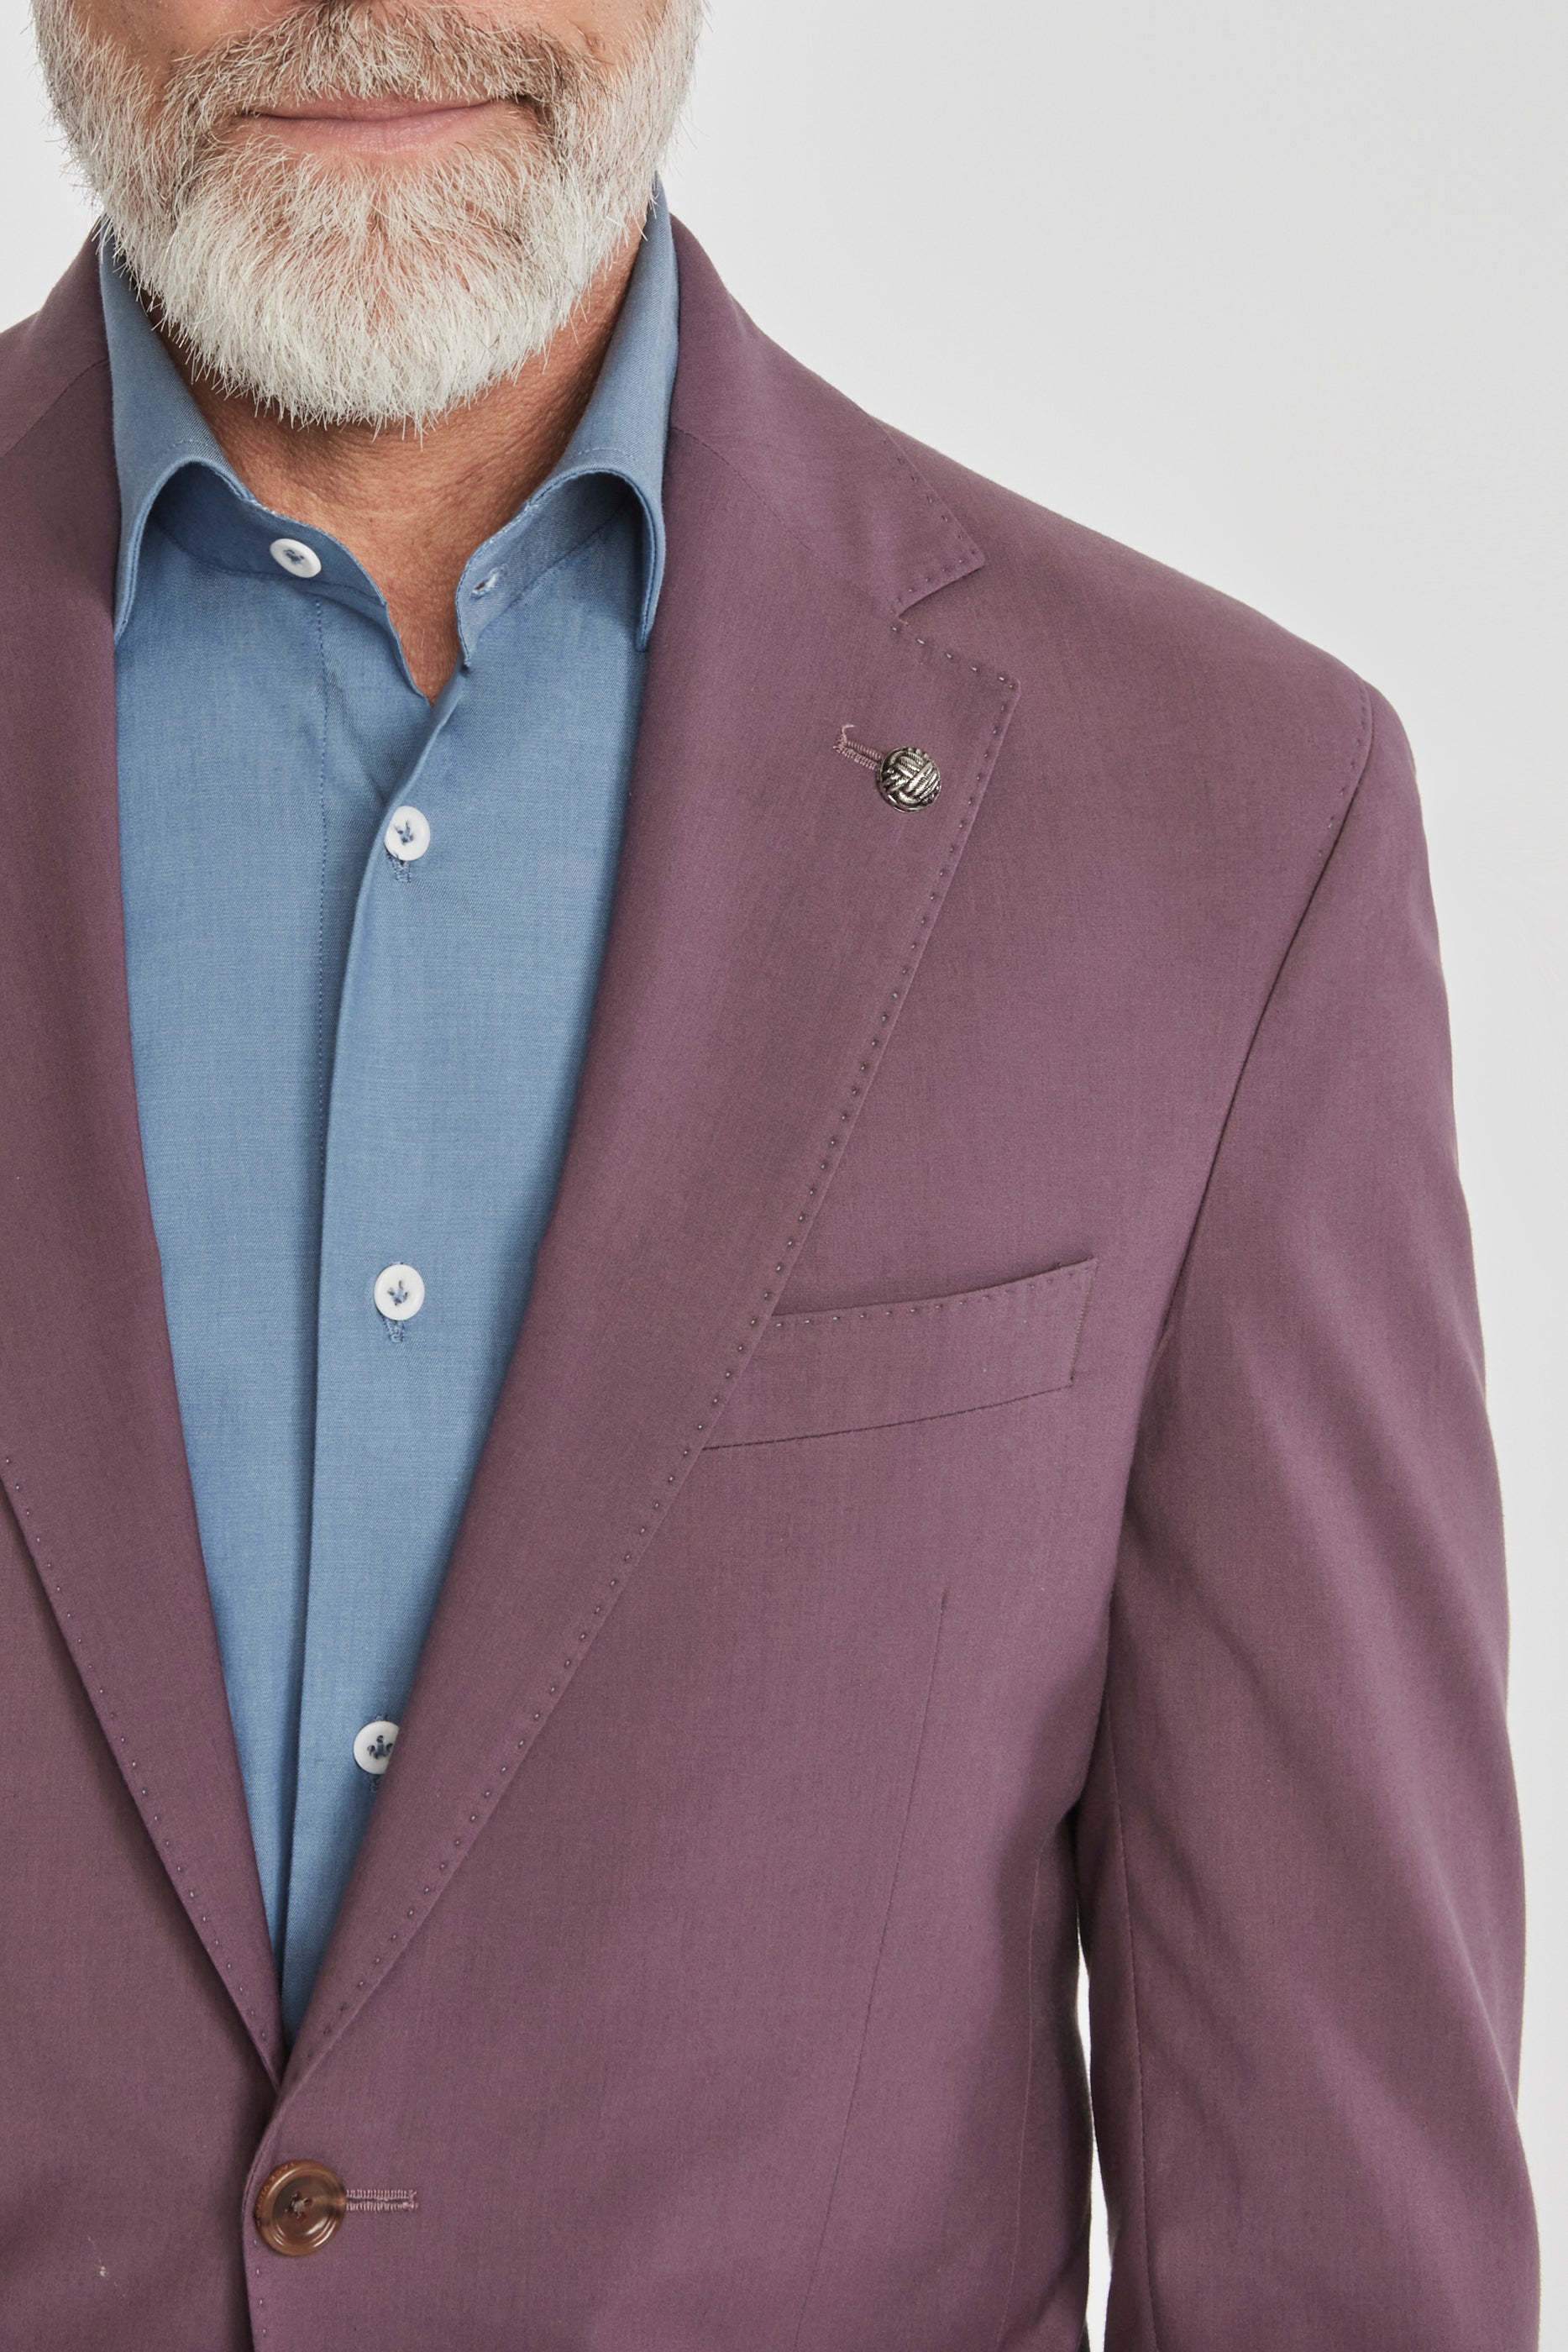 Alt view 1 Midland Solid Wool Cotton Stretch Suit in Berry